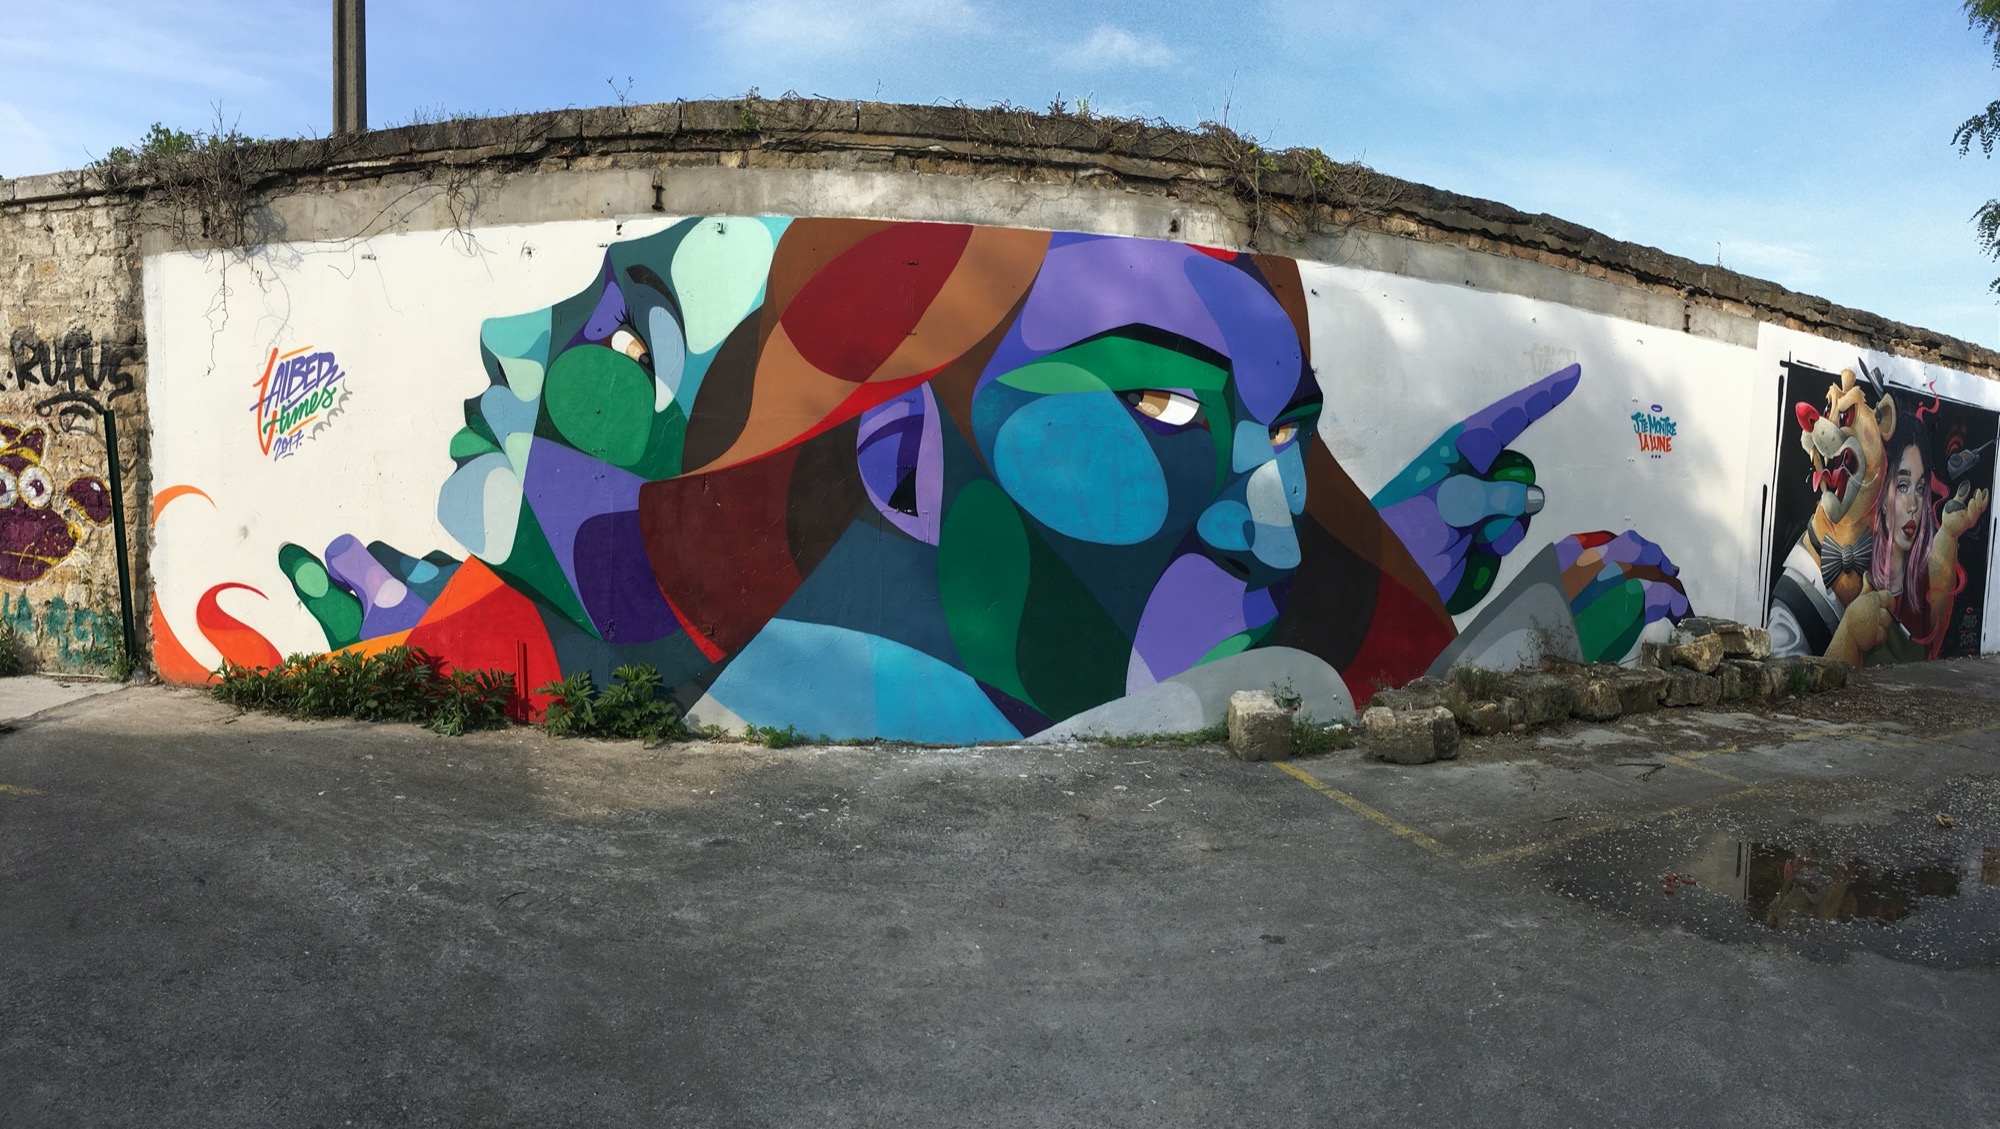 Graffiti 352  by the artist Alber captured by Julien in Bordeaux France